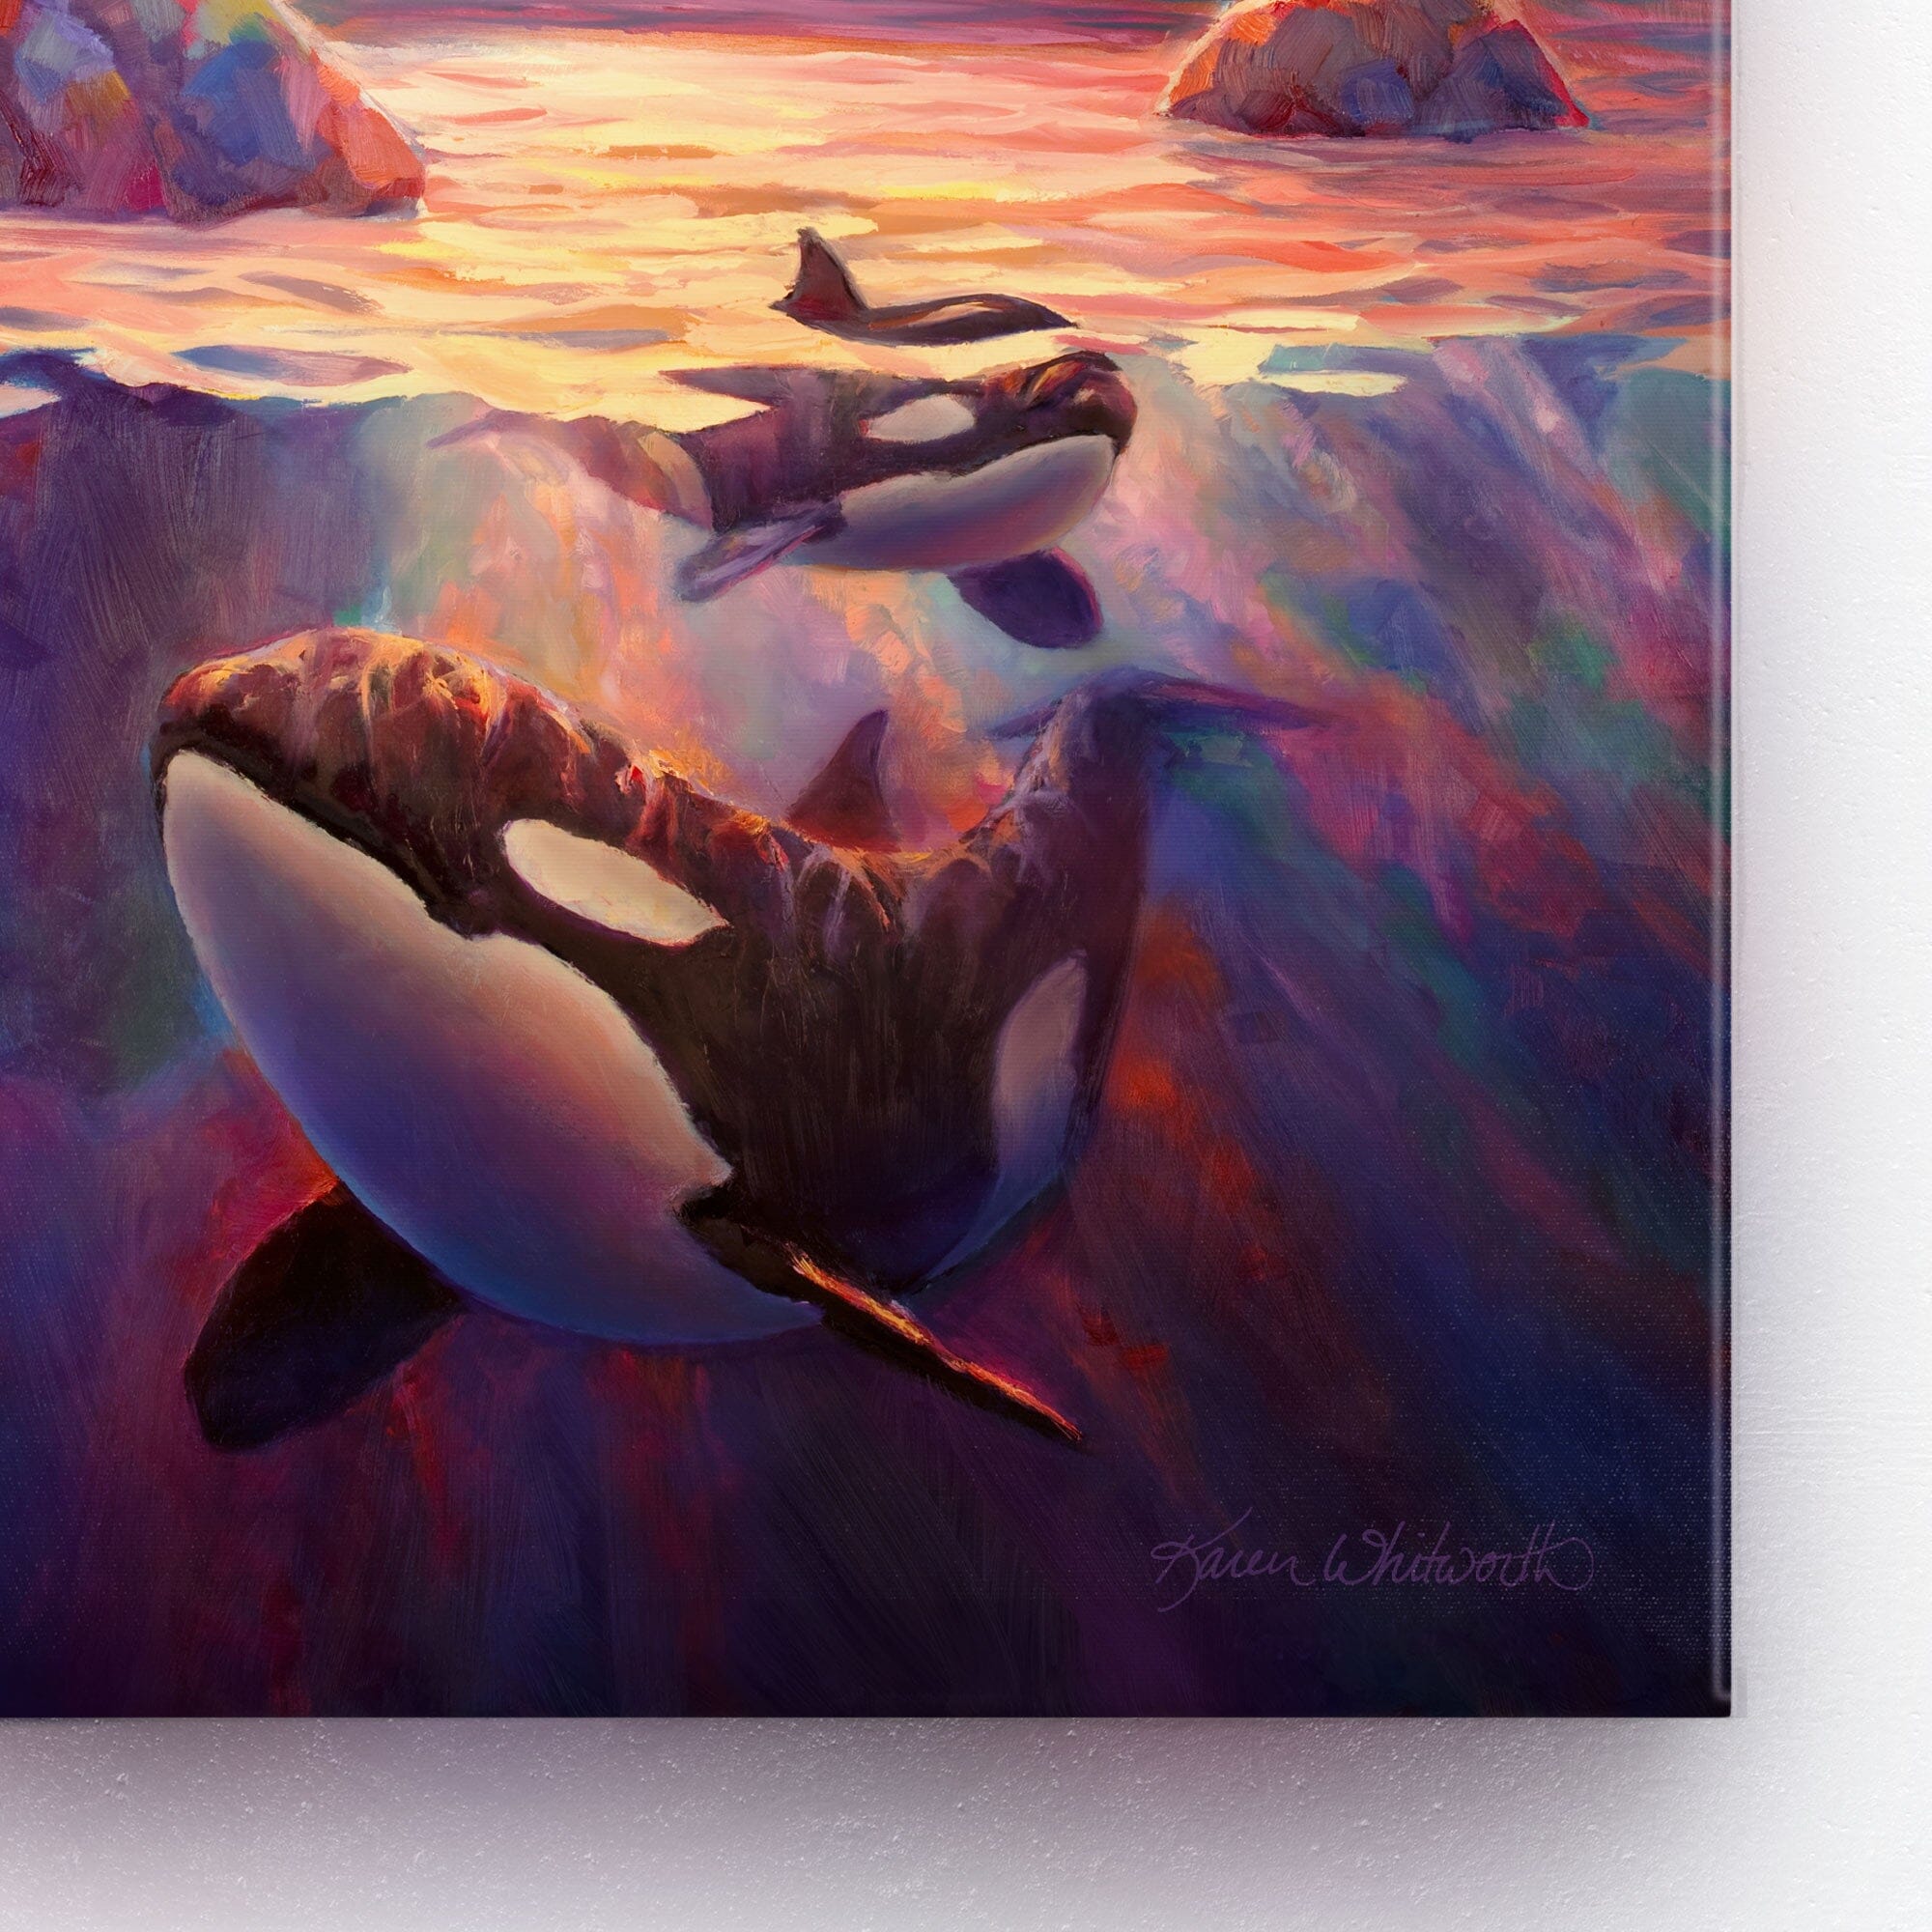 A close up cropped view of an underwater orca painting by artist Karen Whitworth